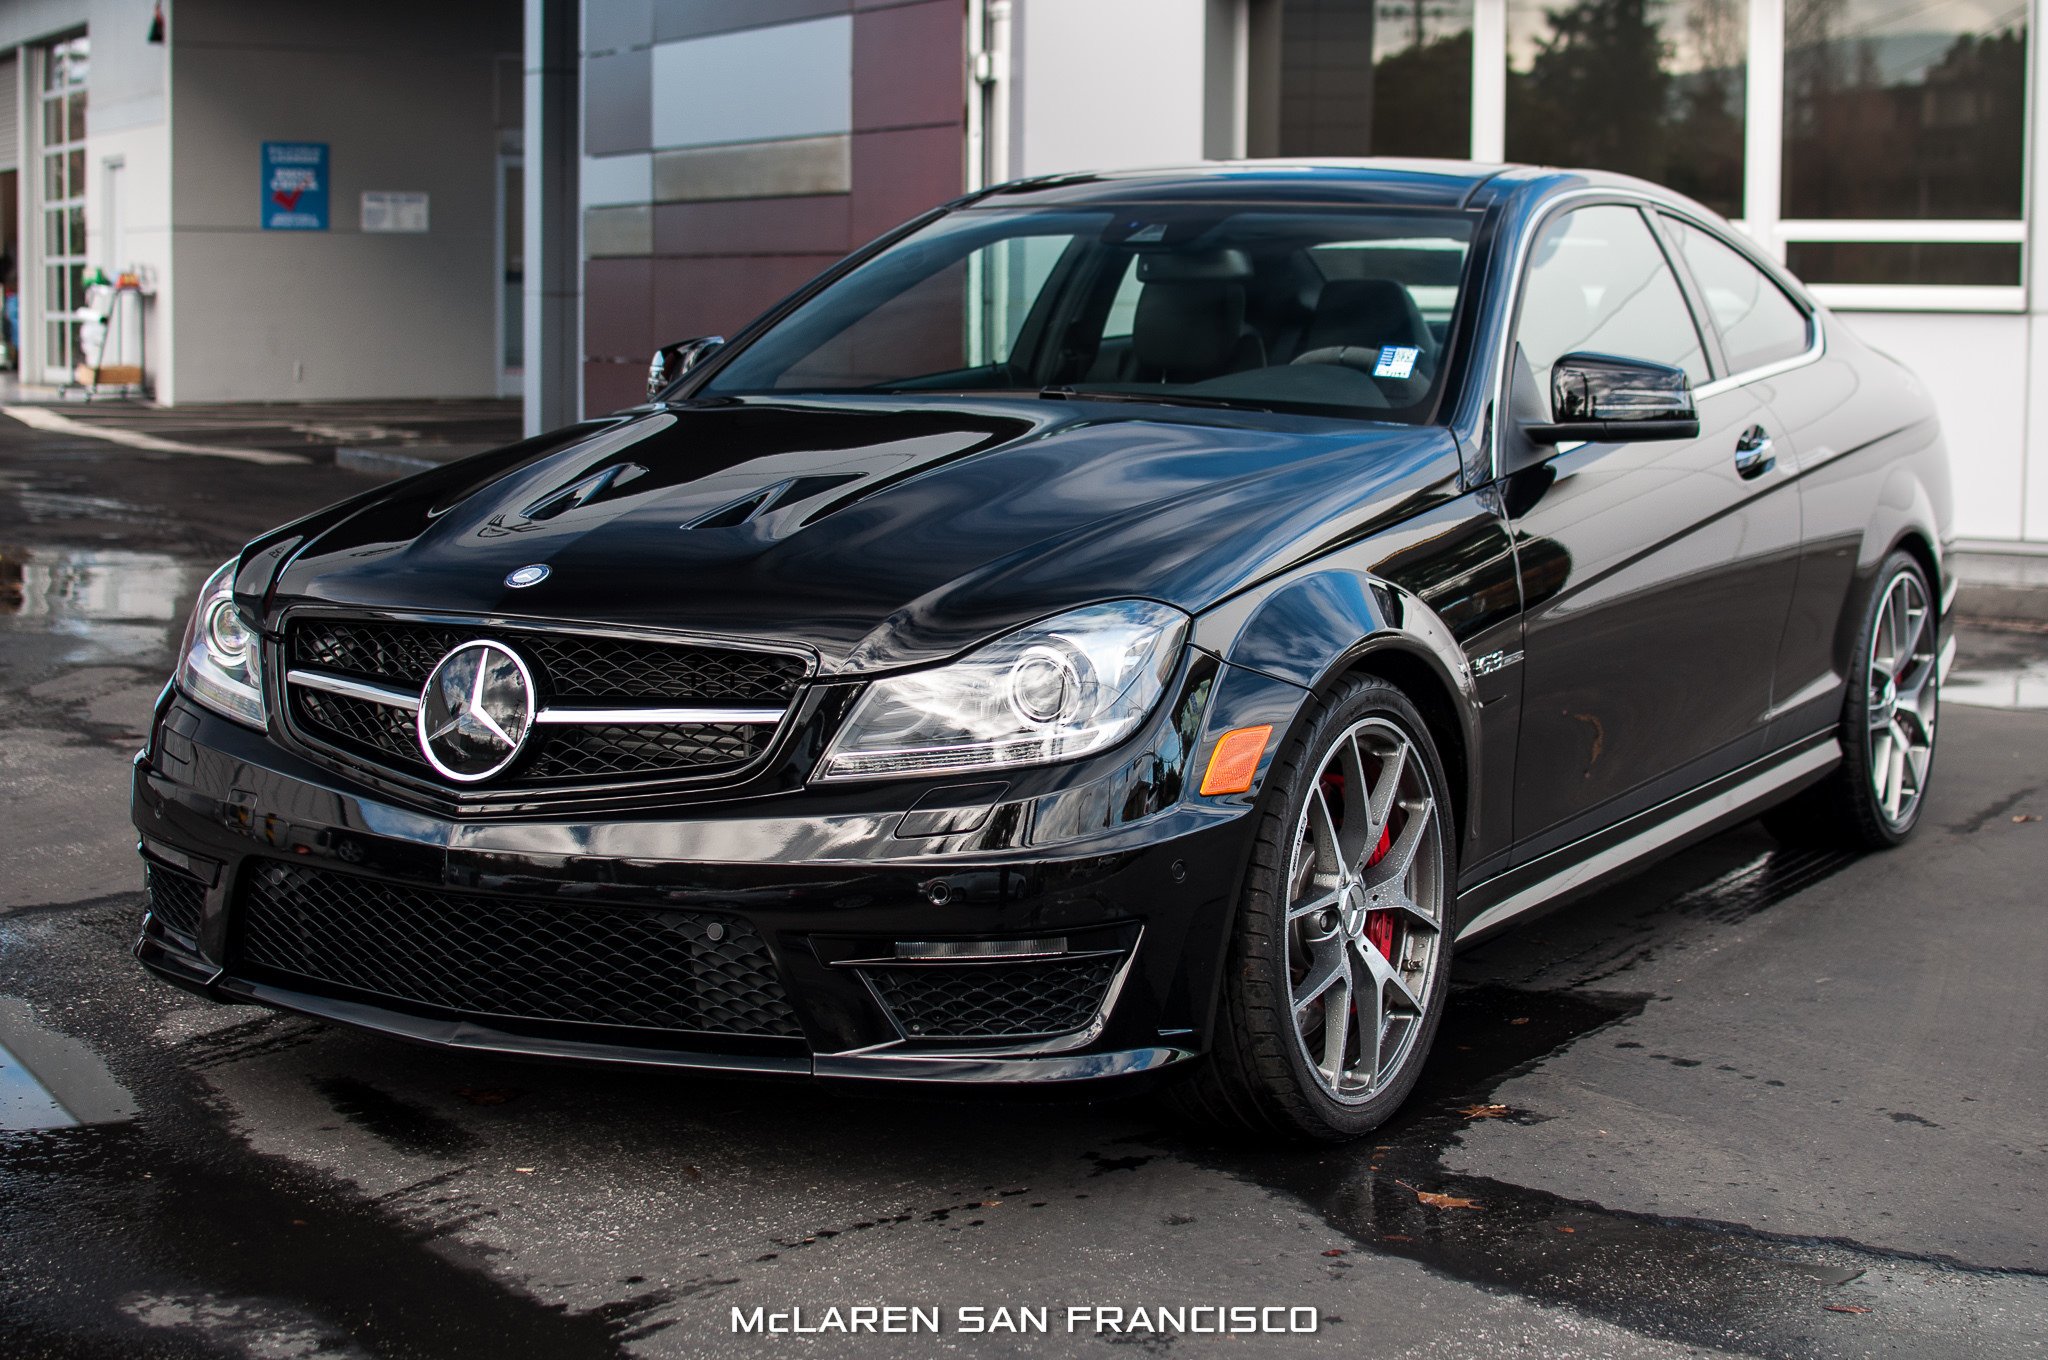 2014, Mercedes, Benz, C63, Amg, Edition, 507, Cars, Coupe, Black Wallpaper